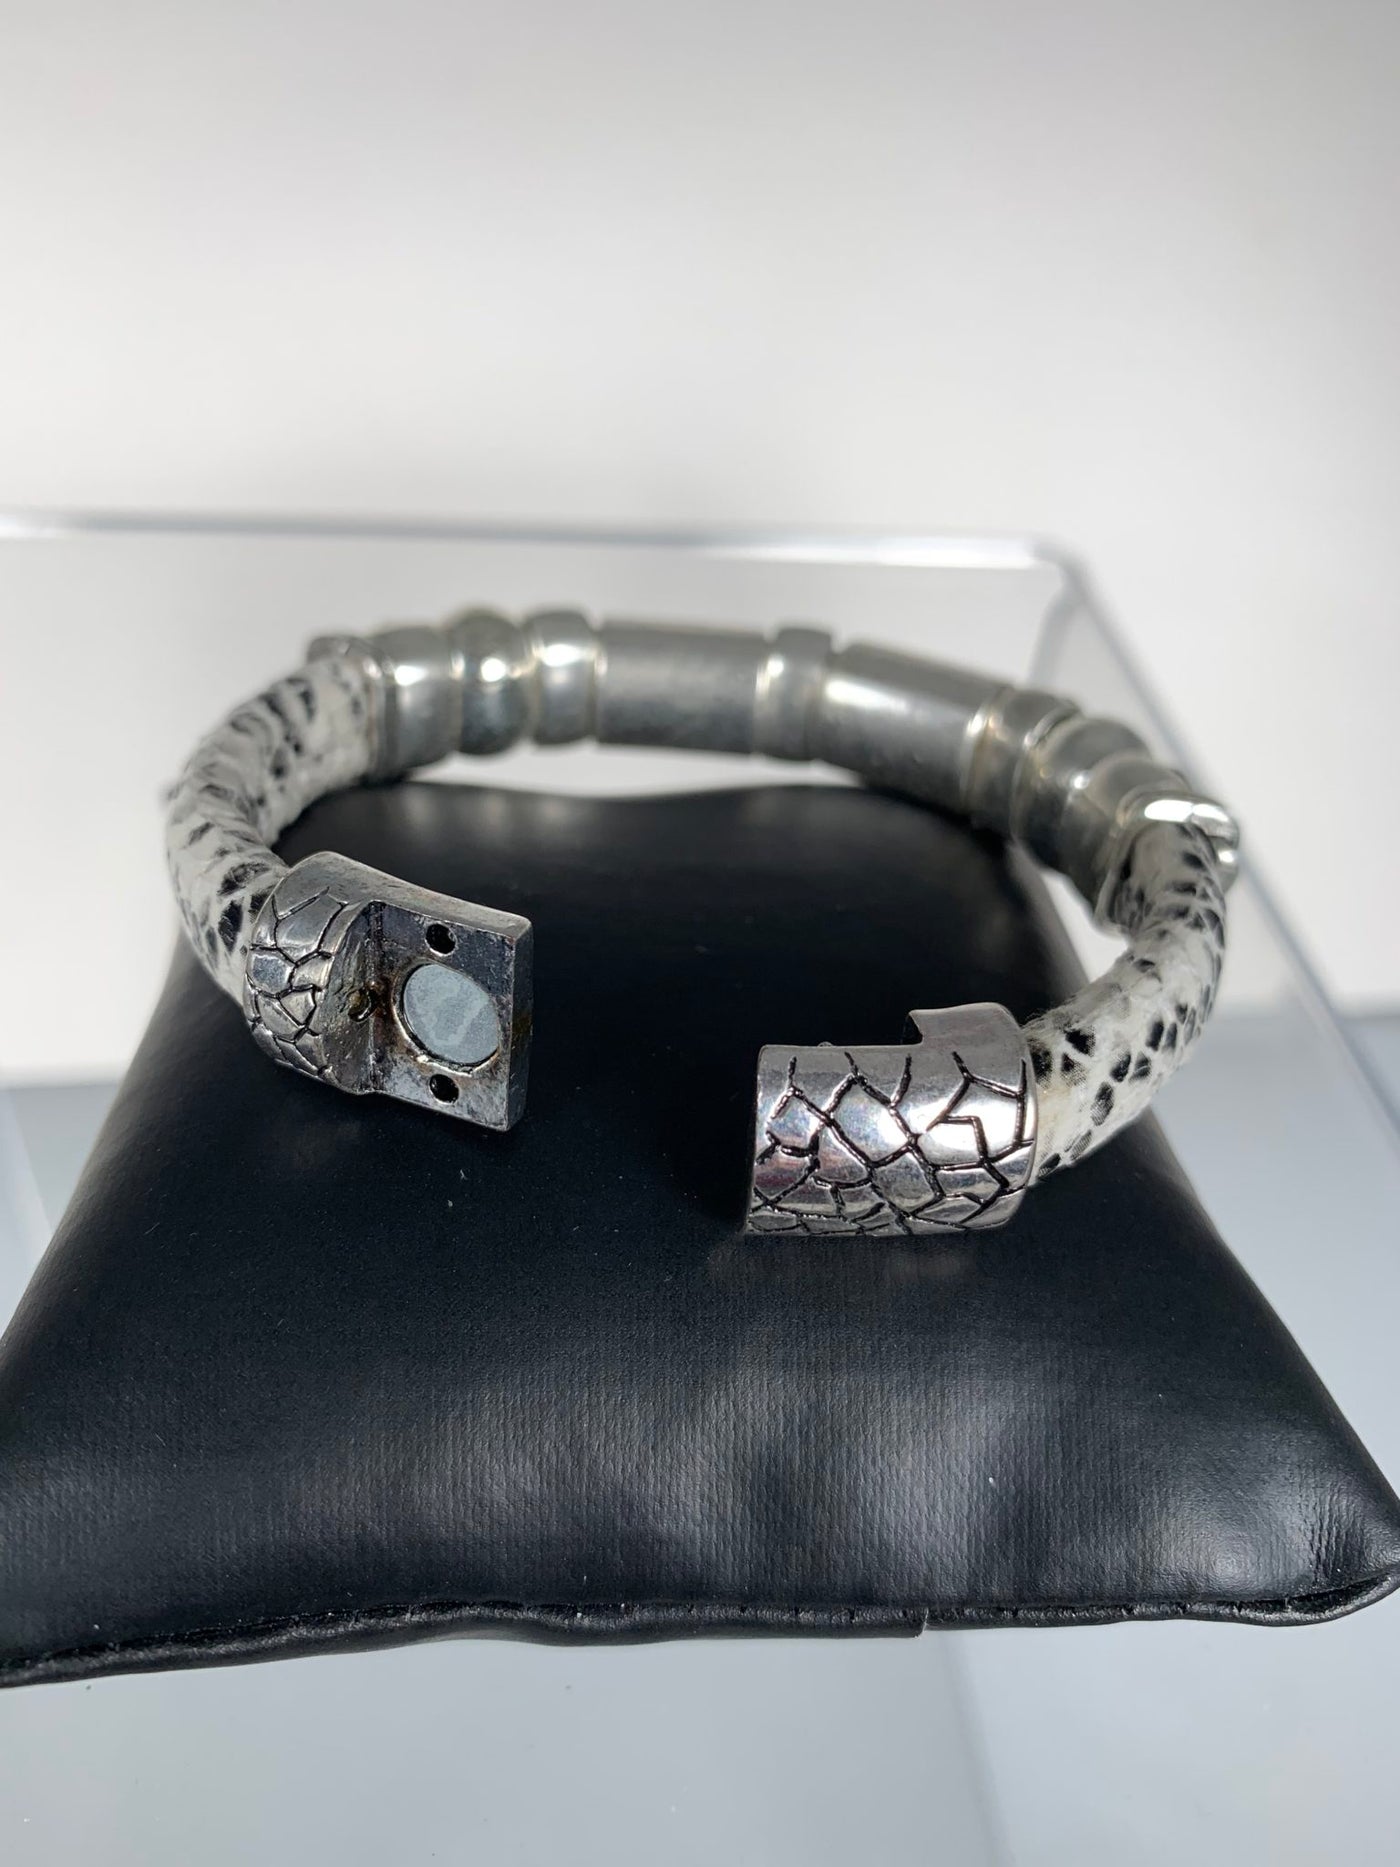 White Faux Snake Skin Band Bracelet Featuring 3 "Little People"